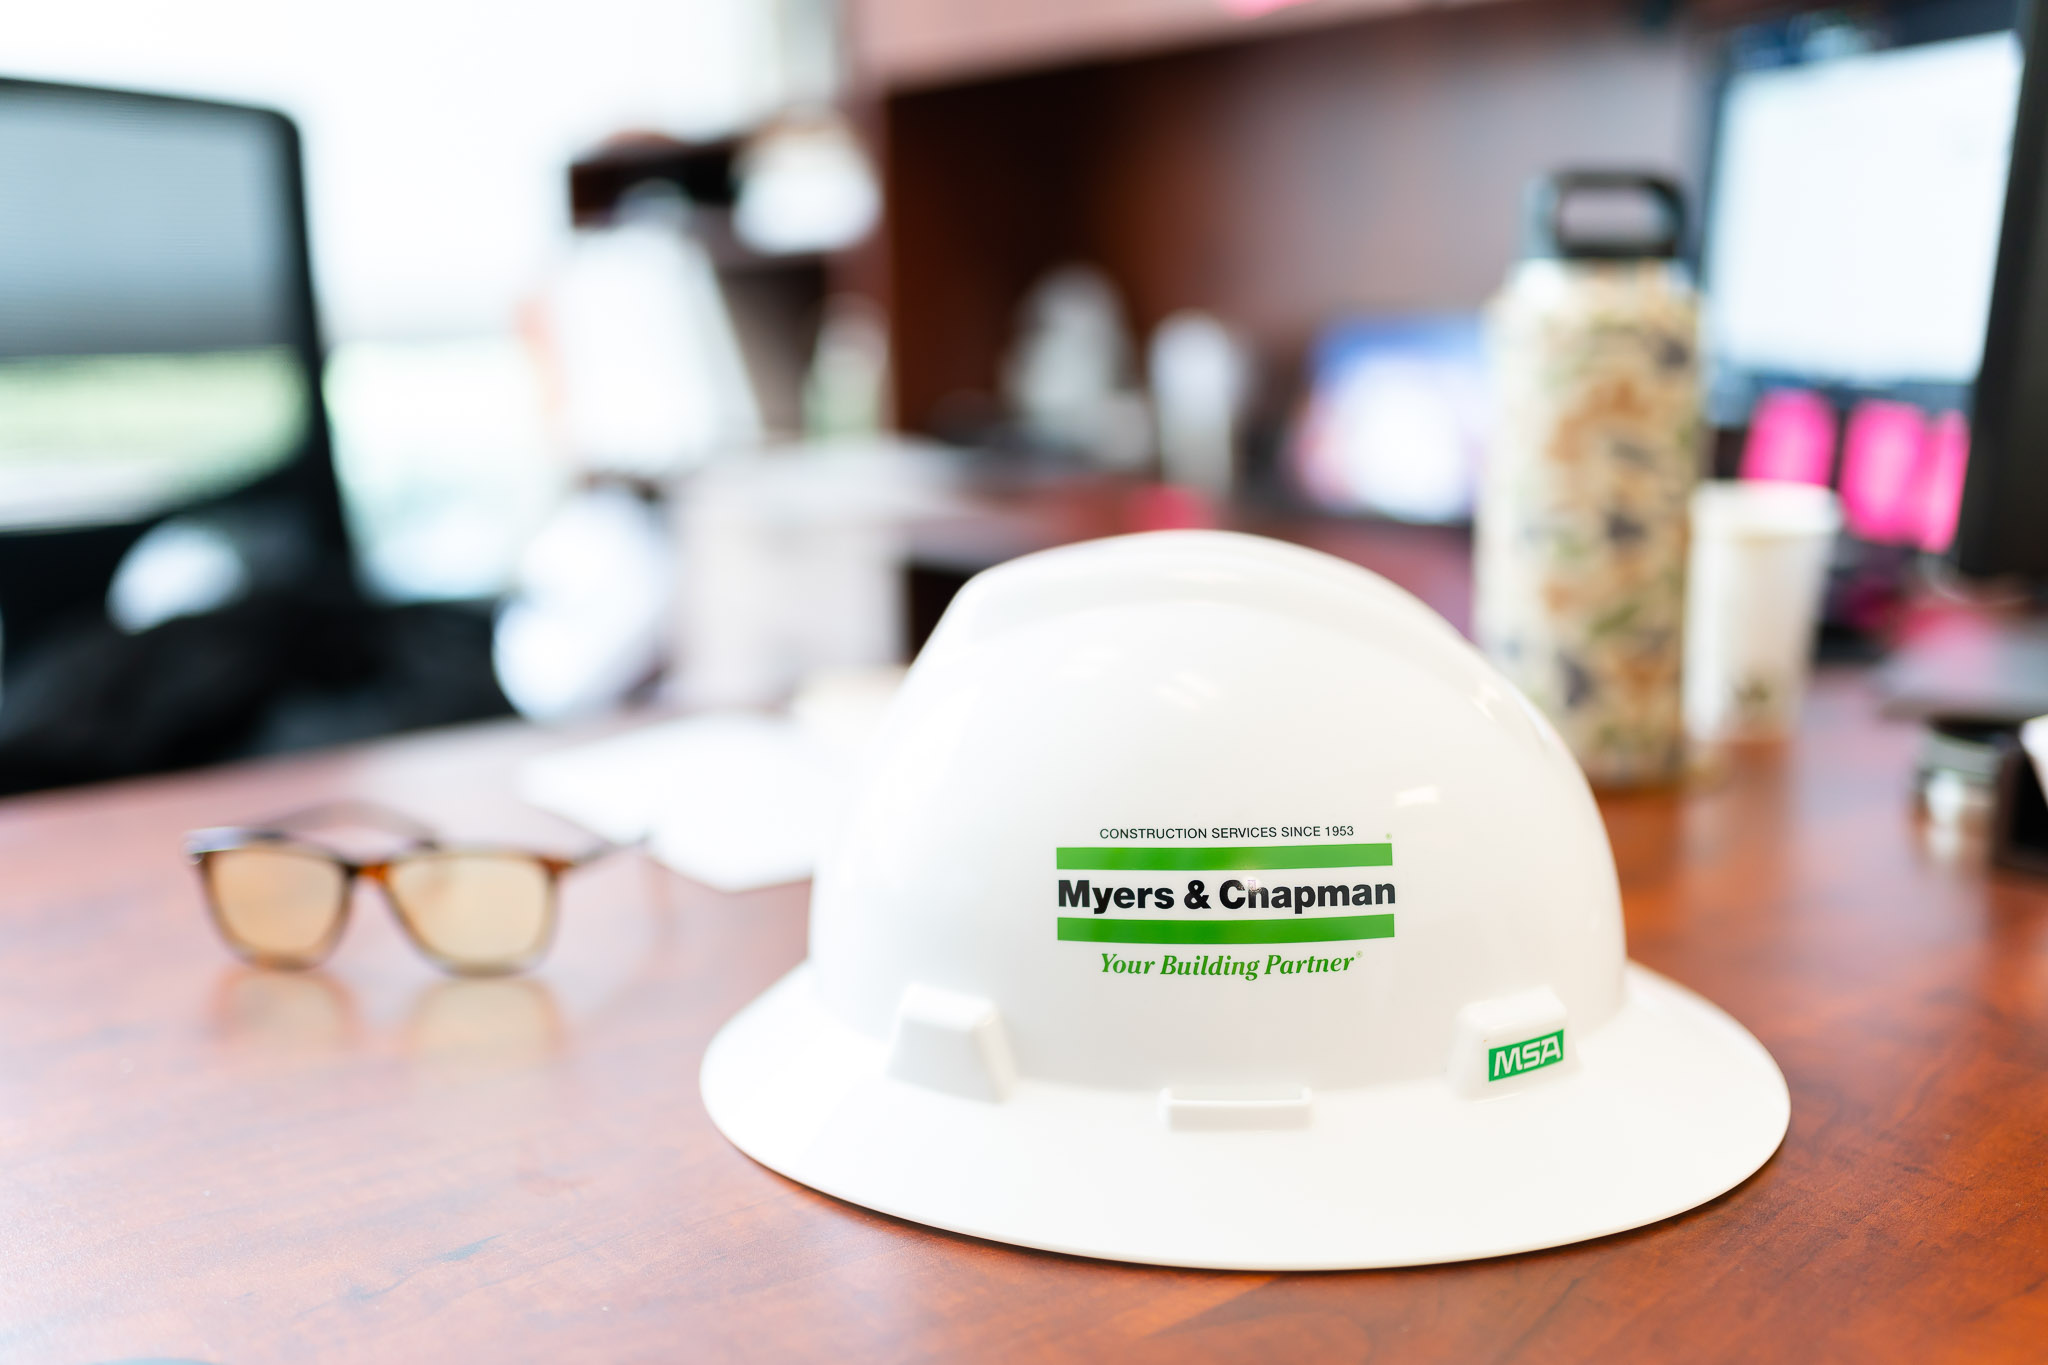 Detail shot of hardhat on a desk in an office